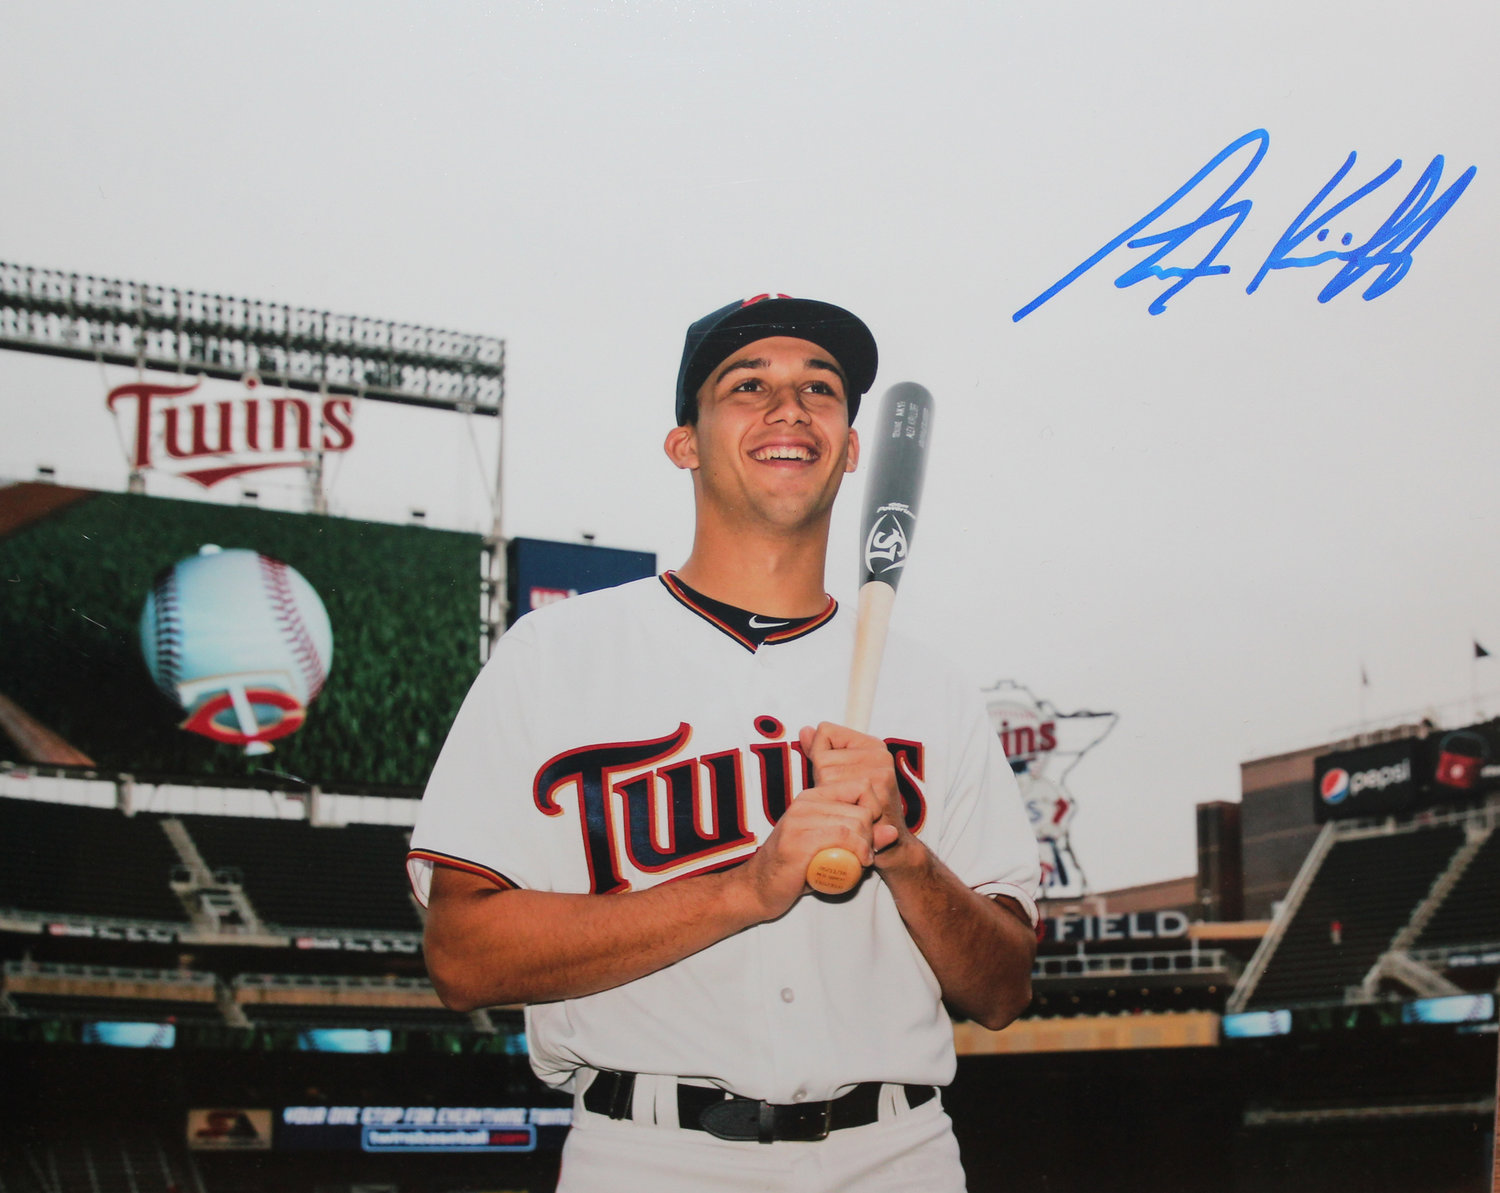 ALEX KIRILLOFF 2015 LEAF PERFECT GAME CERTIFIED AUTOGRAPHED ROOKIE CARD TWINS 2016 1ST ROUND PICK!